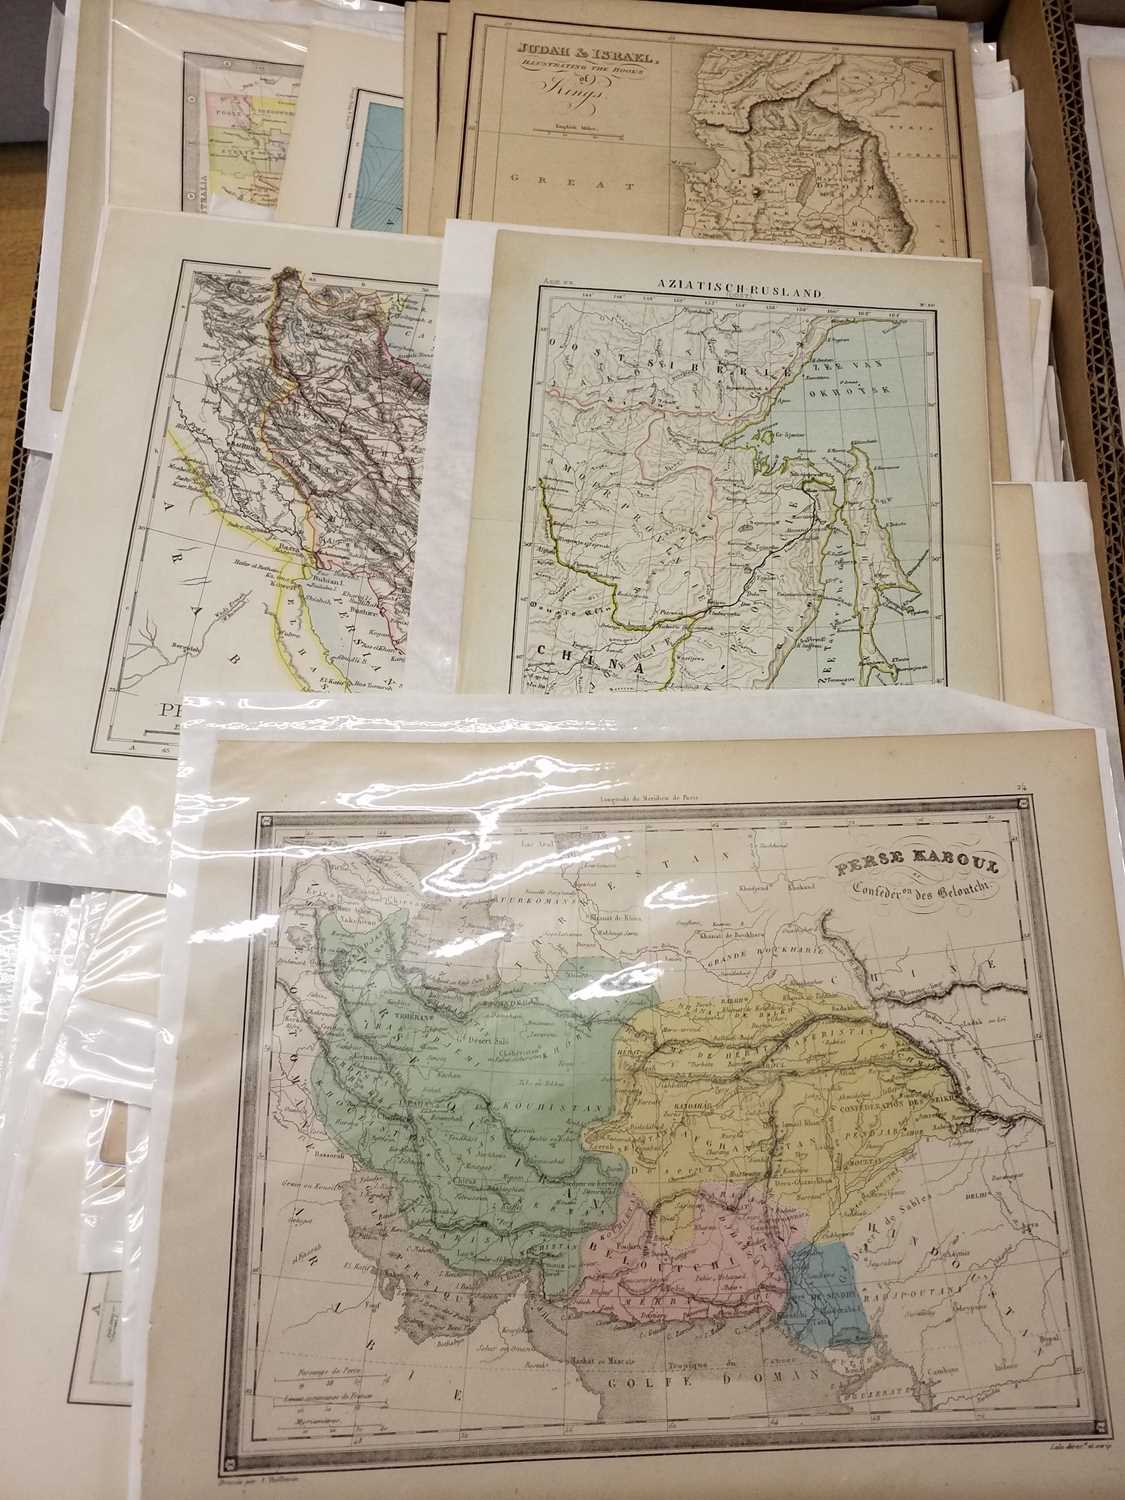 Lot 27 - Foreign Maps. A collection of approximately 480 maps, mostly 19th & early 20th century